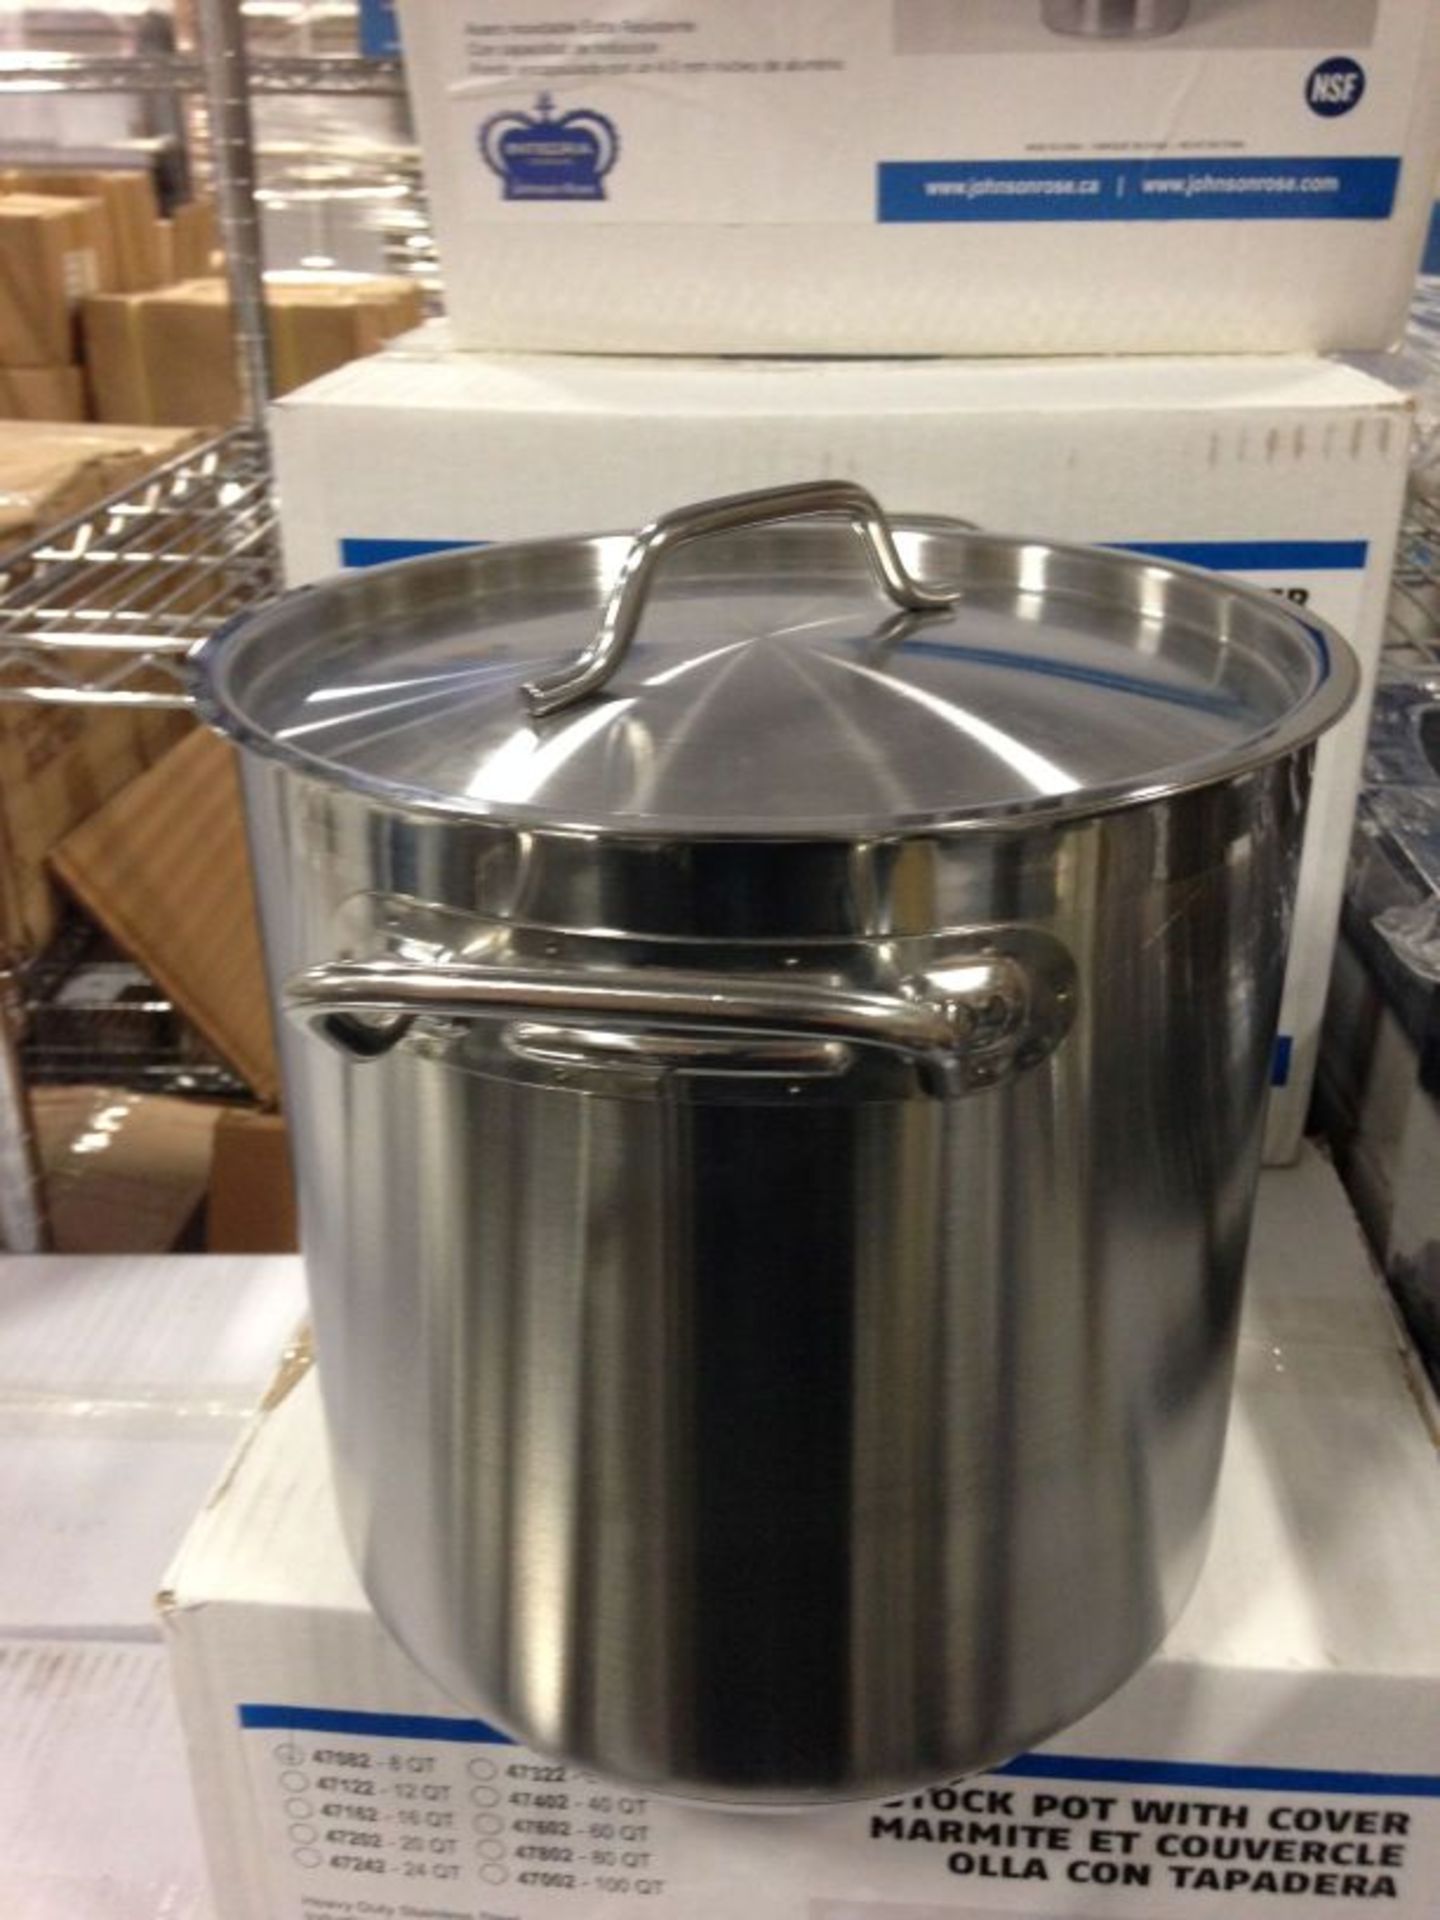 Heavy Duty 8qt Induction Stainless Steel Stock Pot with Lid - Image 3 of 6